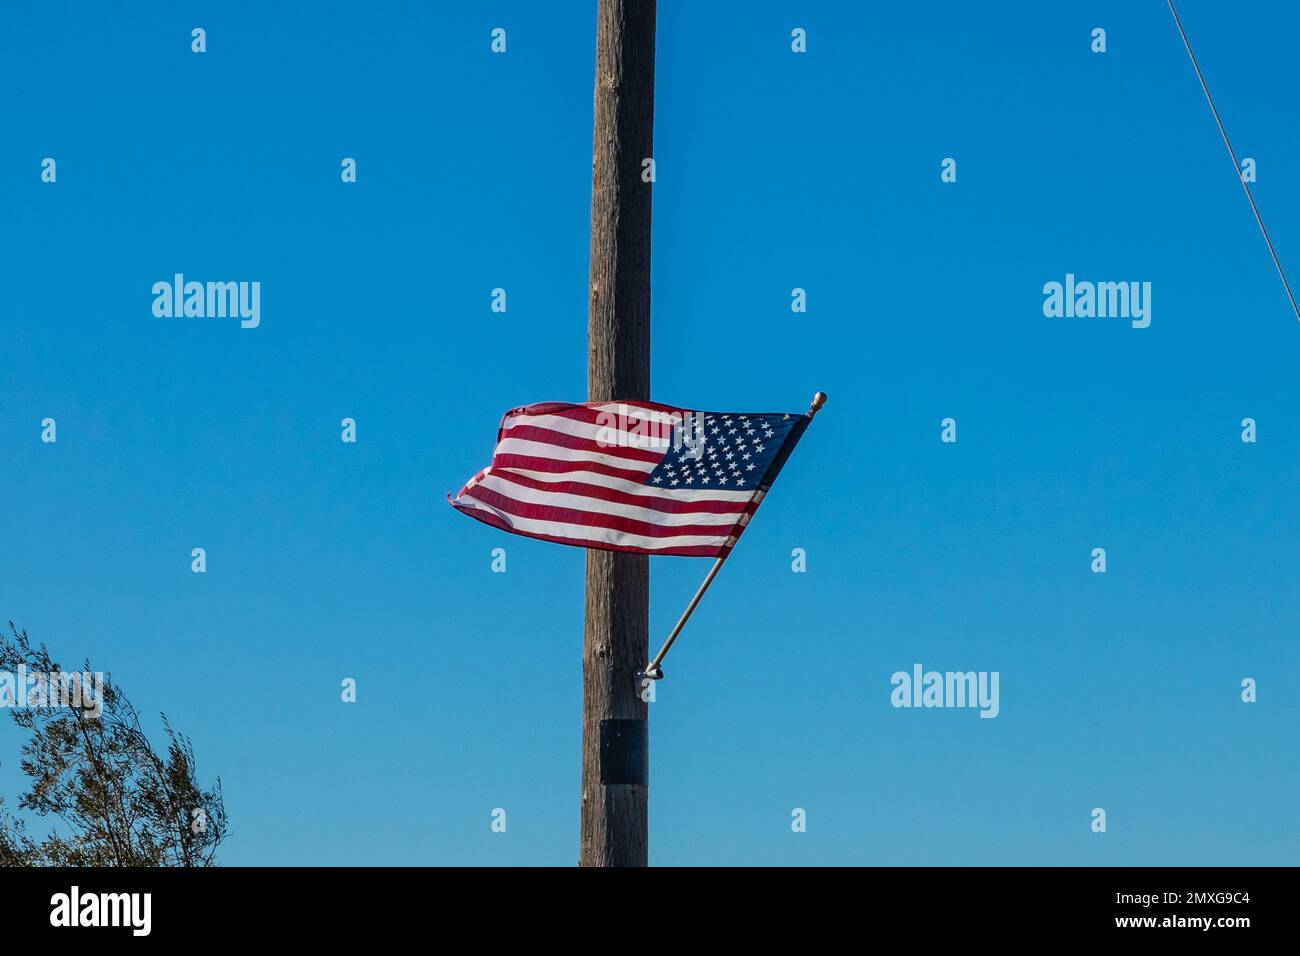 An American flag fluttering in the wind on a utility pole in Stanislaus county California USA Stock Photo